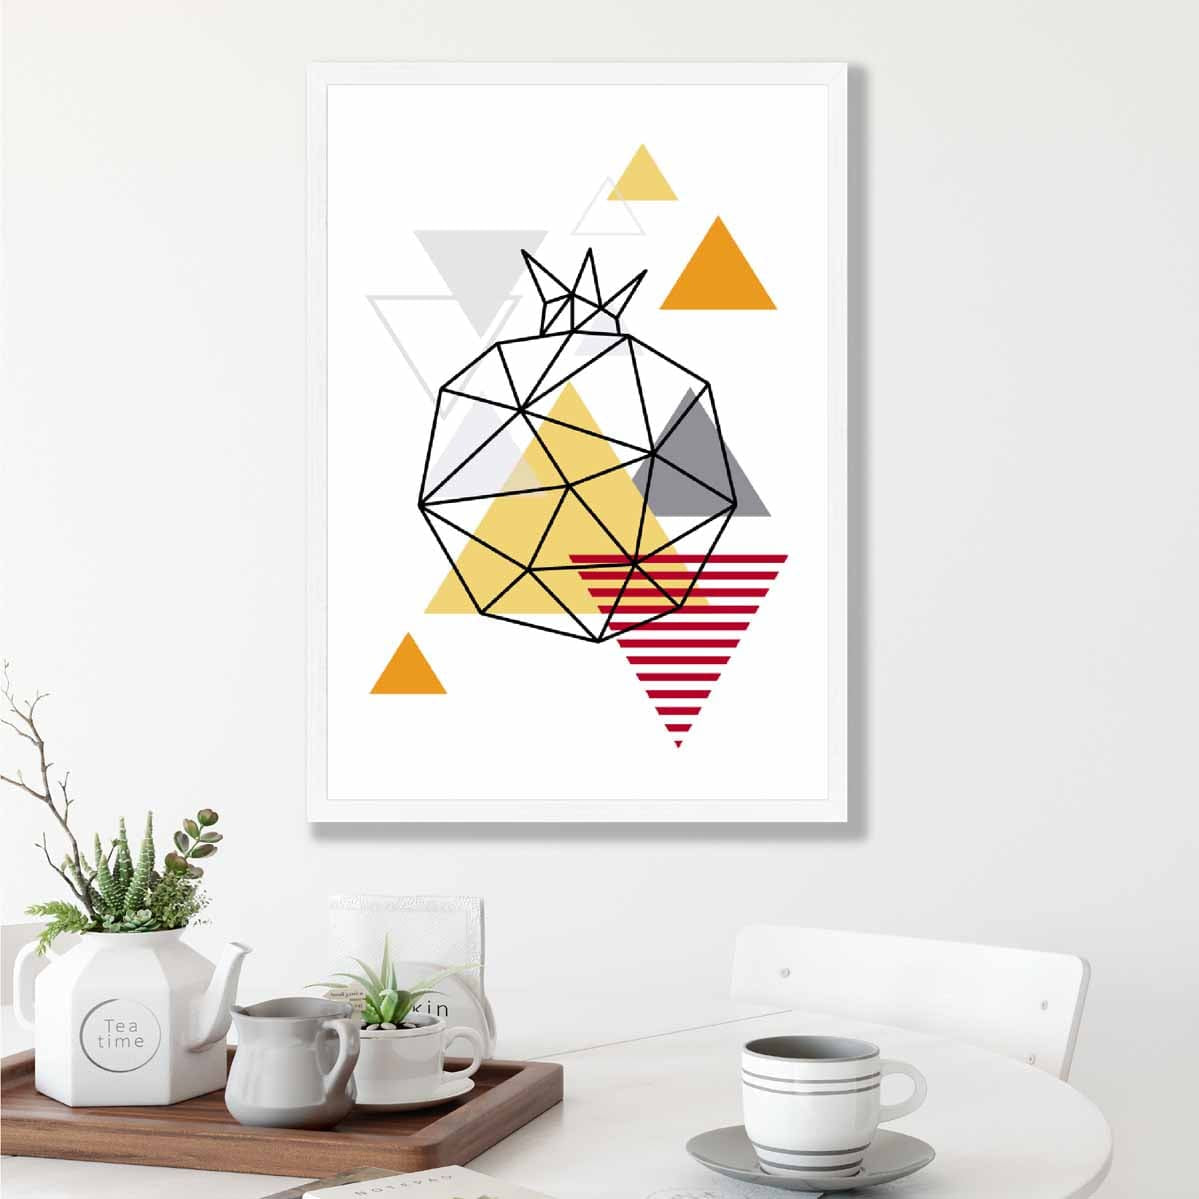 Geometric Fruit Line art Poster of Pomegranate in Orange Red Yellow